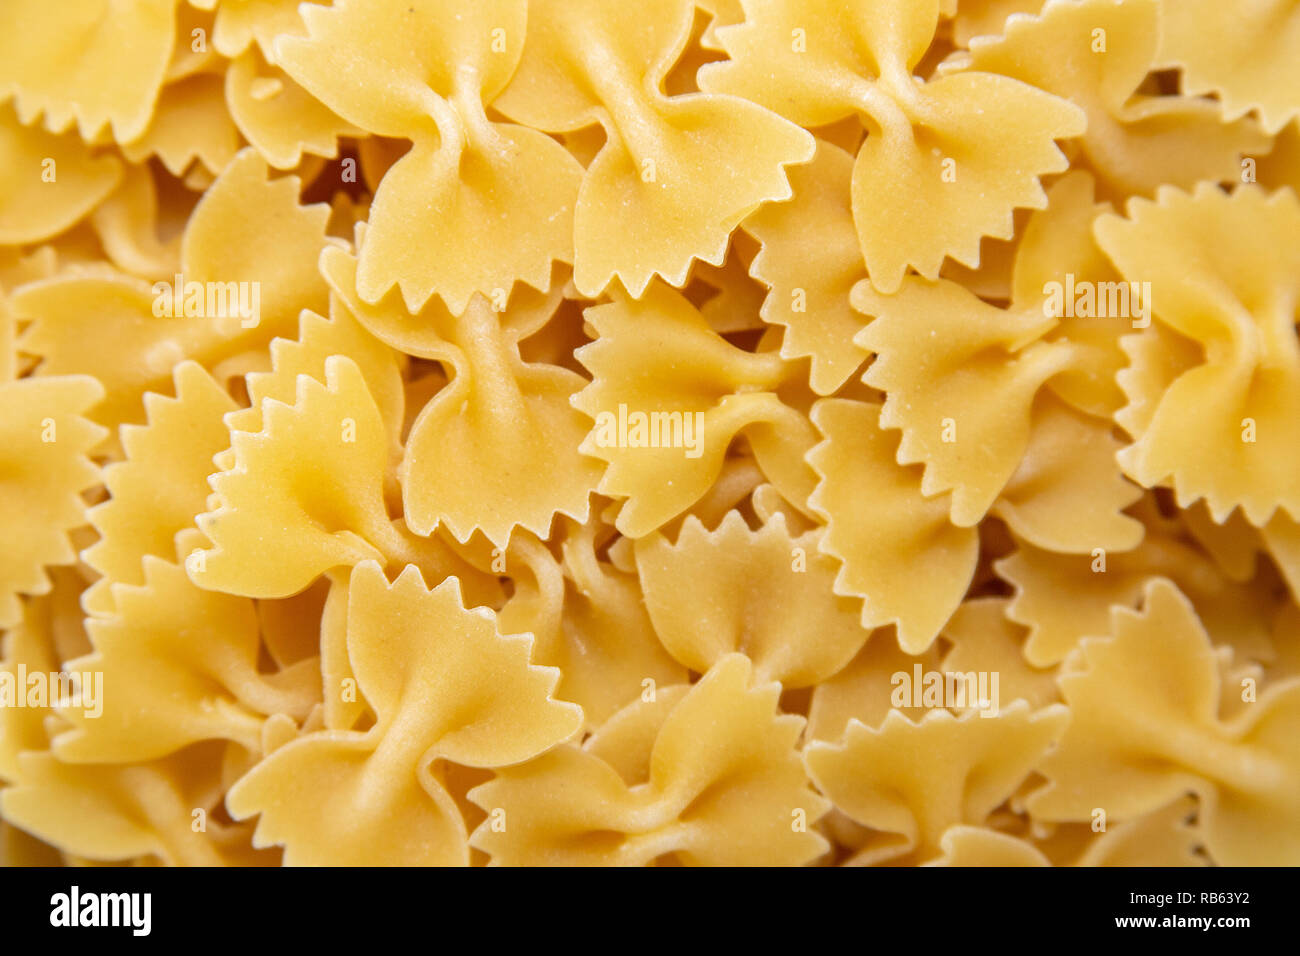 Download Pile Farfalle Yellow Pasta Abstract High Resolution Stock Photography And Images Alamy Yellowimages Mockups